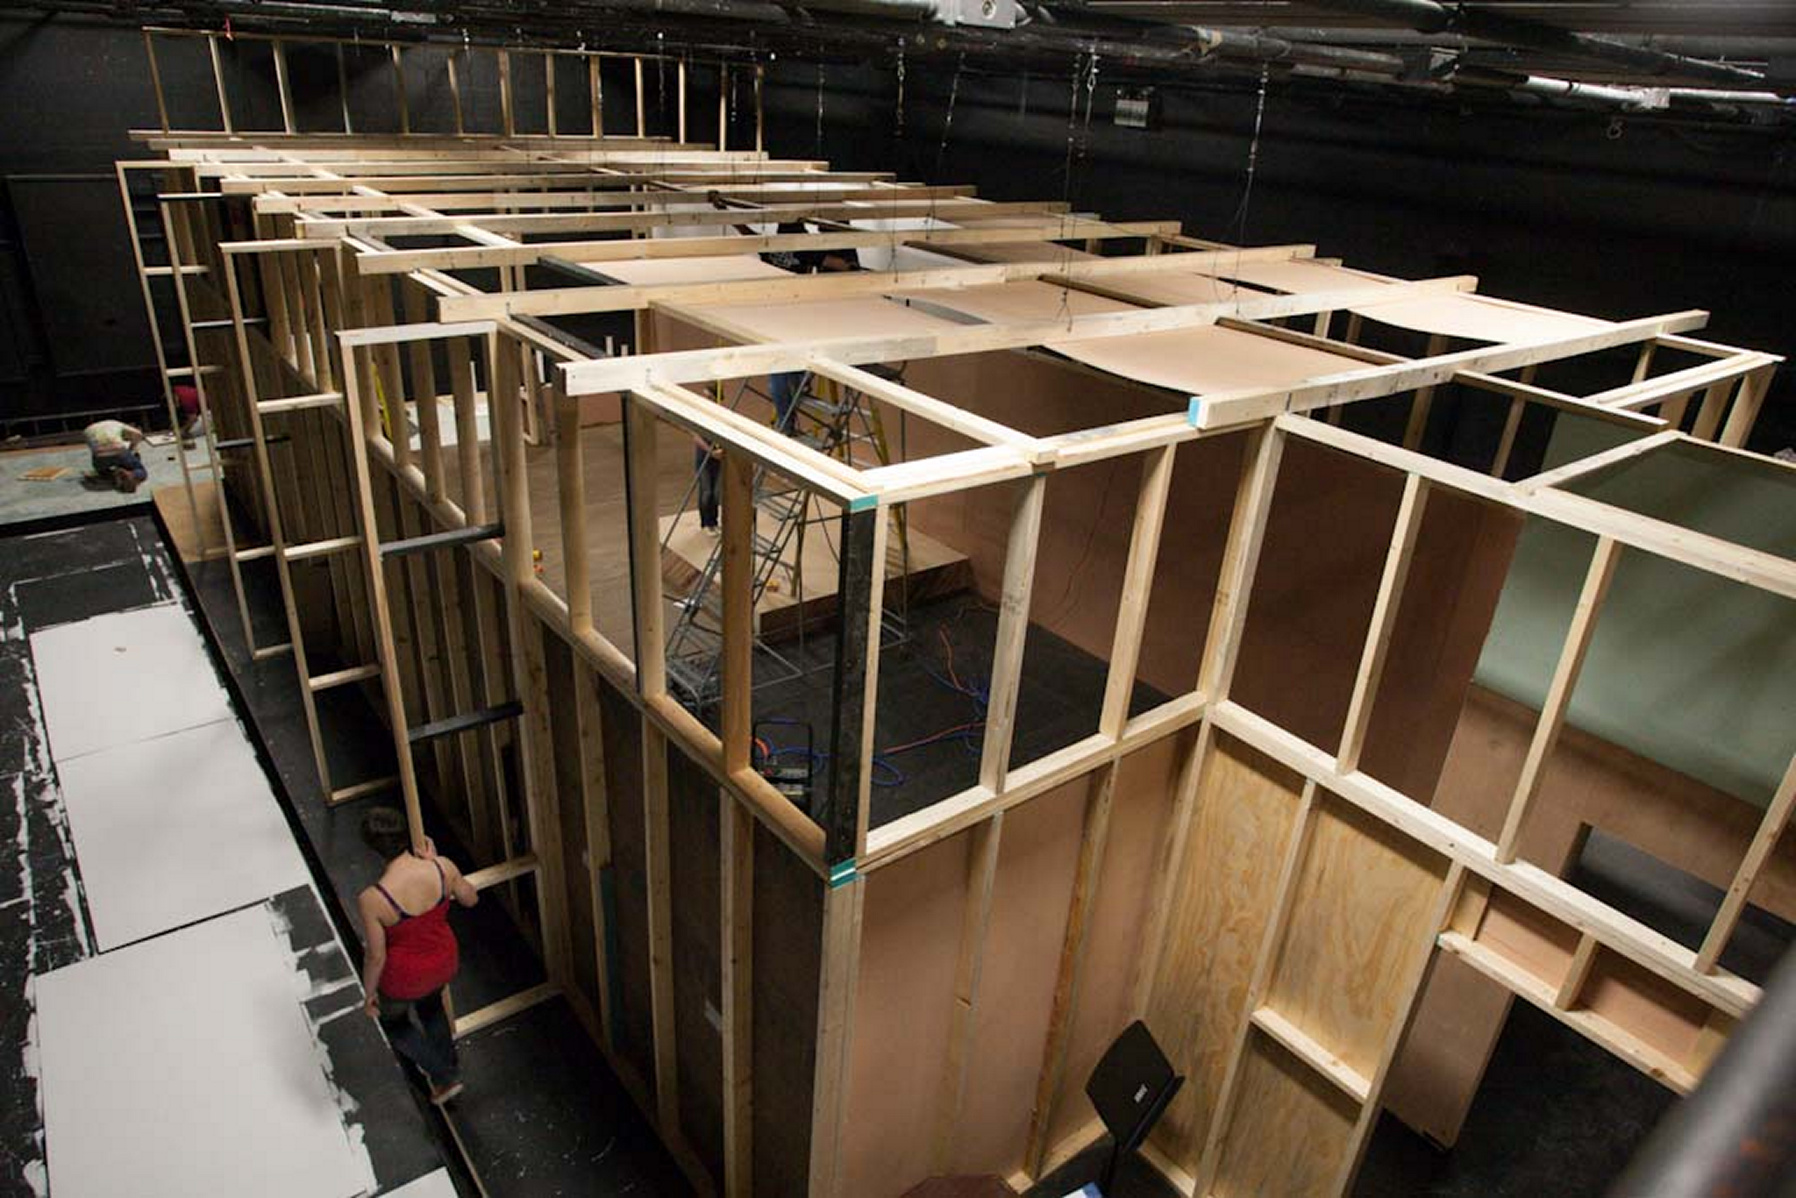 Students construct the set in studio theatre